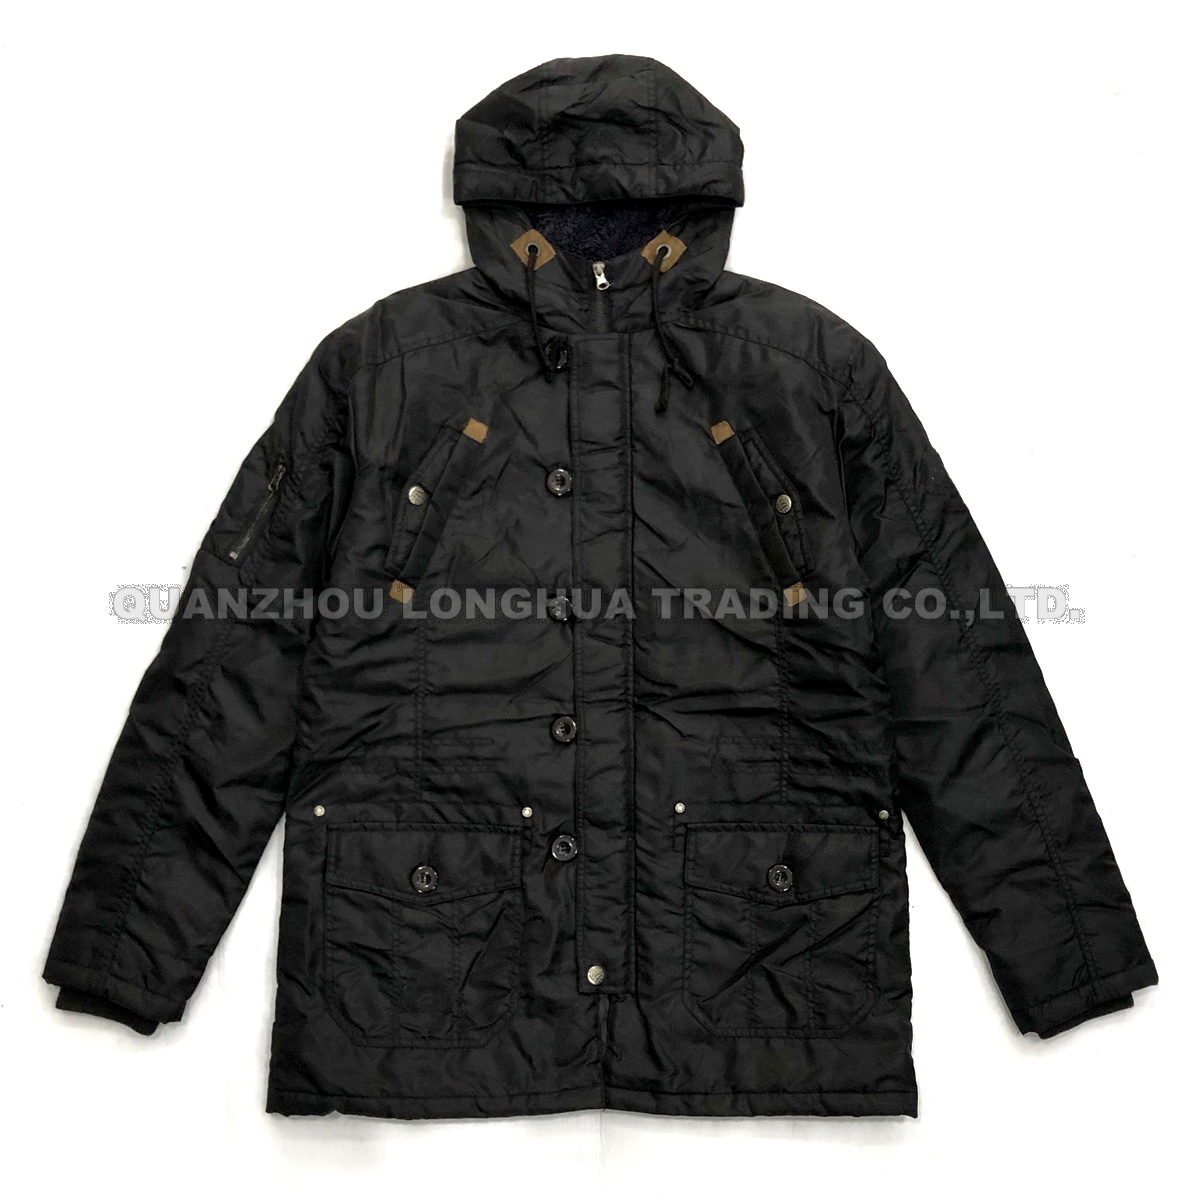 What are the materials of the customized microfiber jacket 